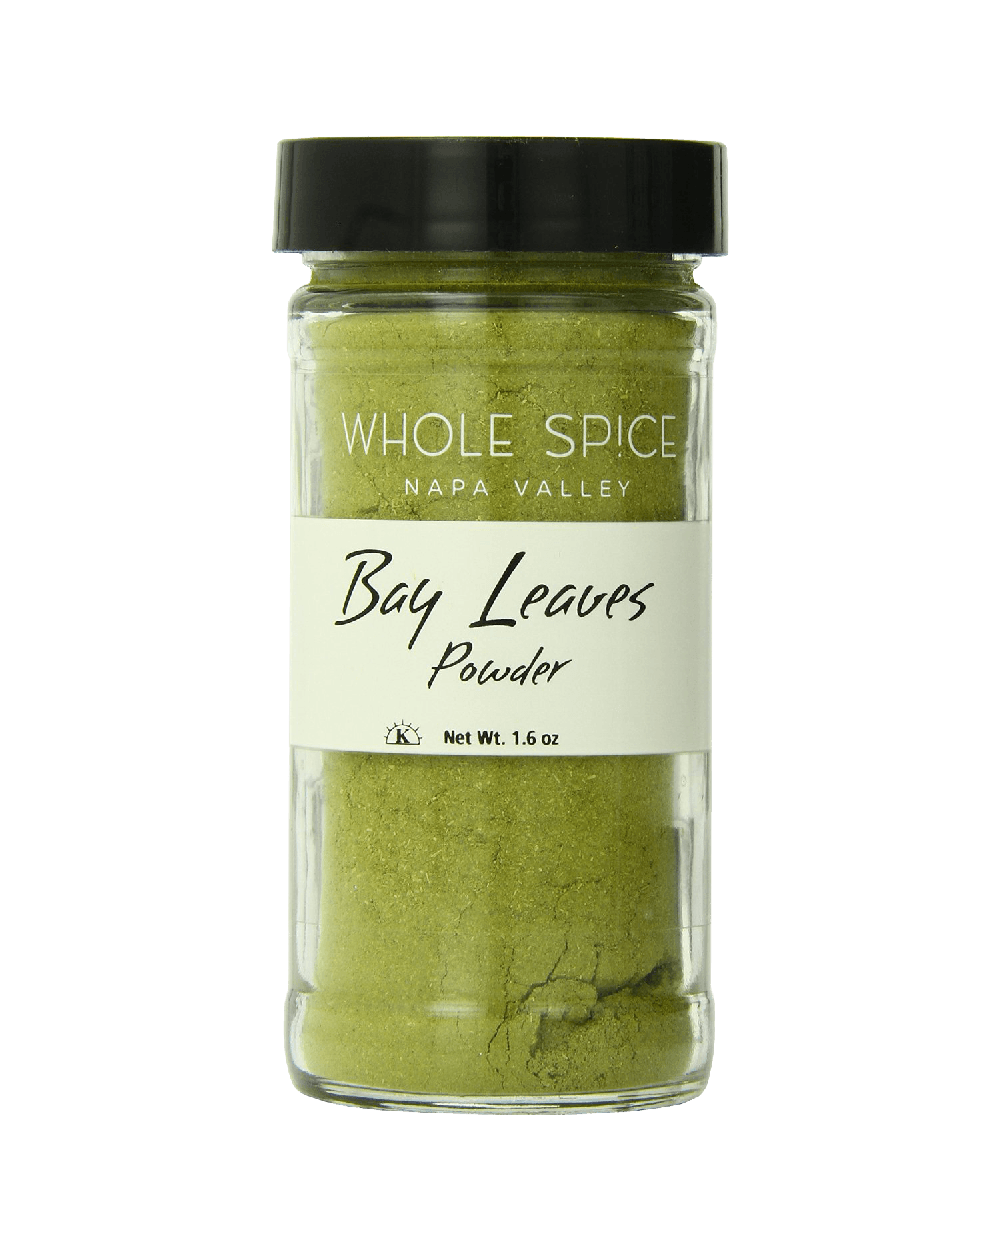 Whole Spice Bay Leaves Powder